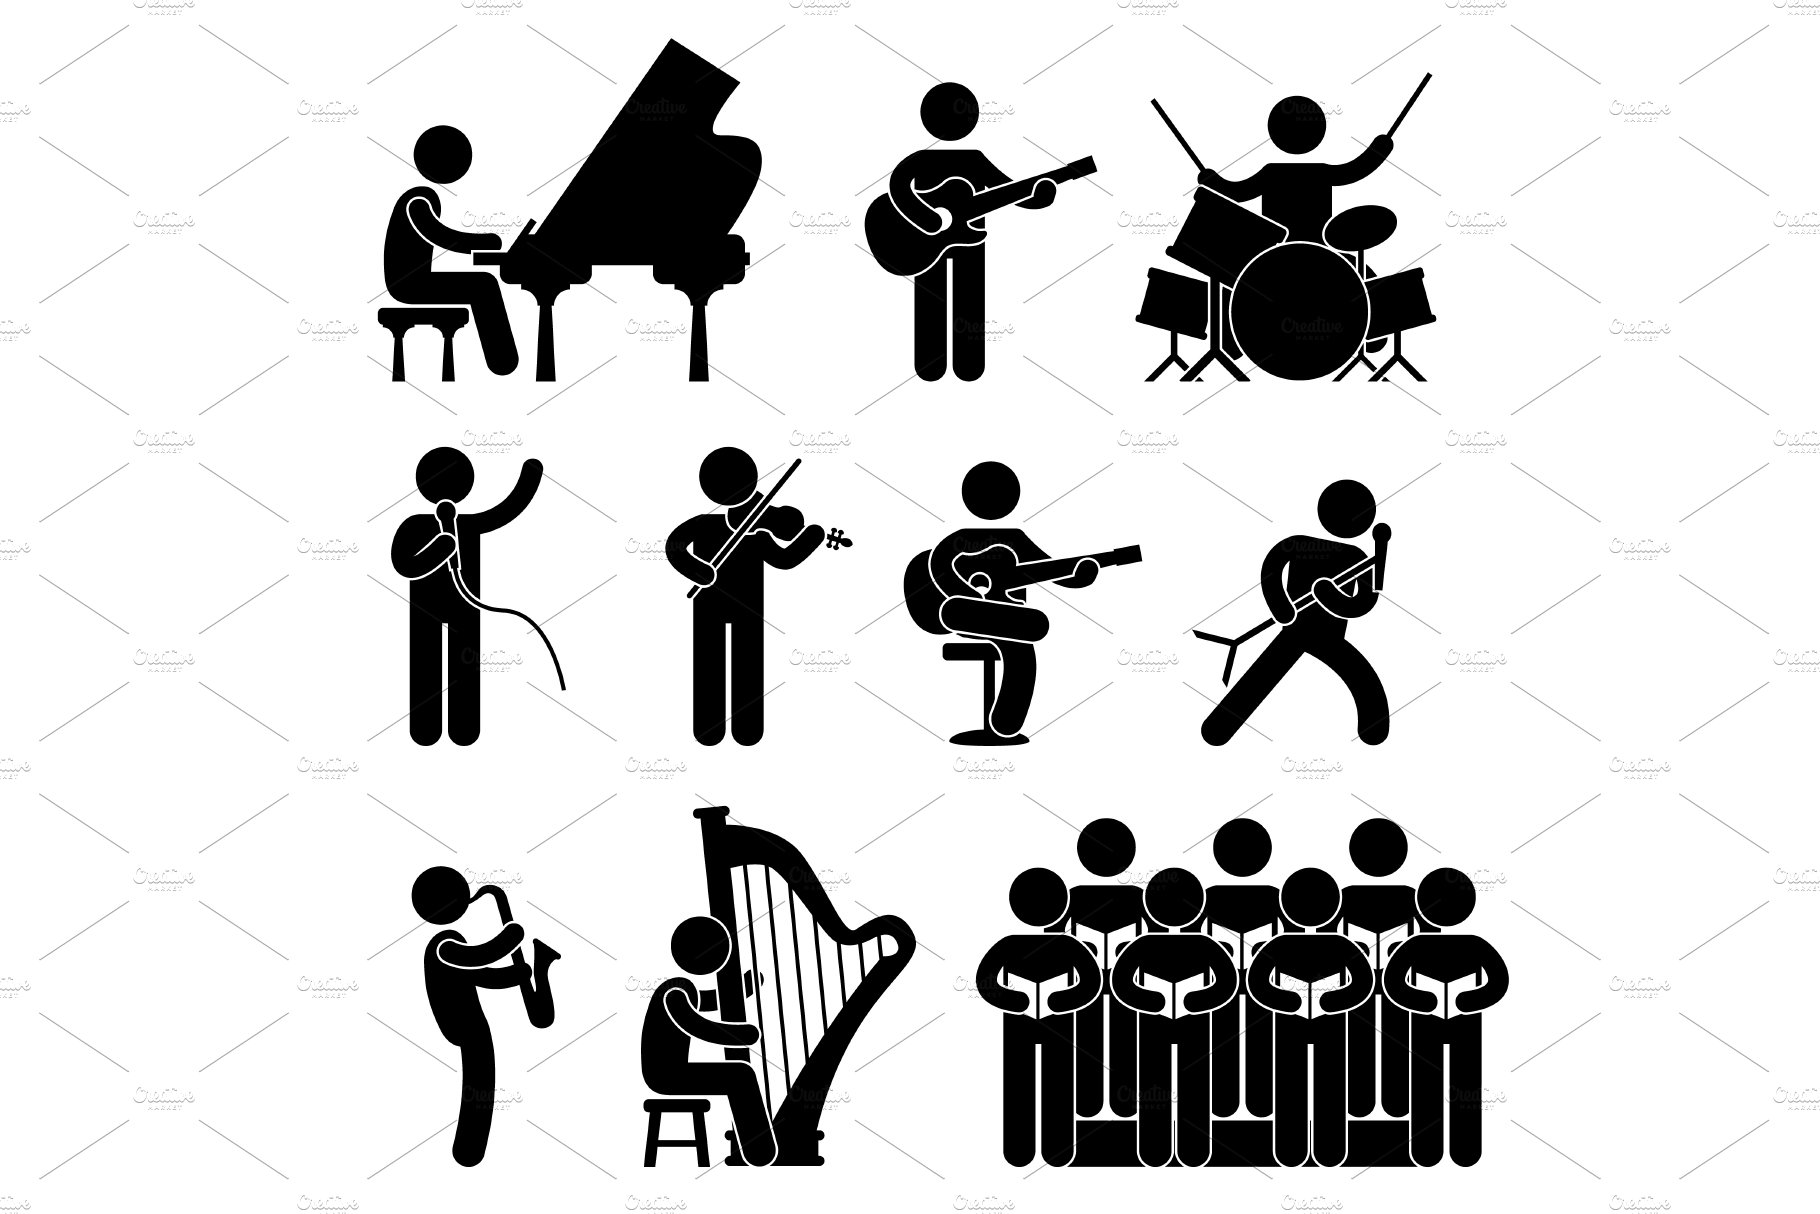 Musician Concert Choir Singer Icons cover image.